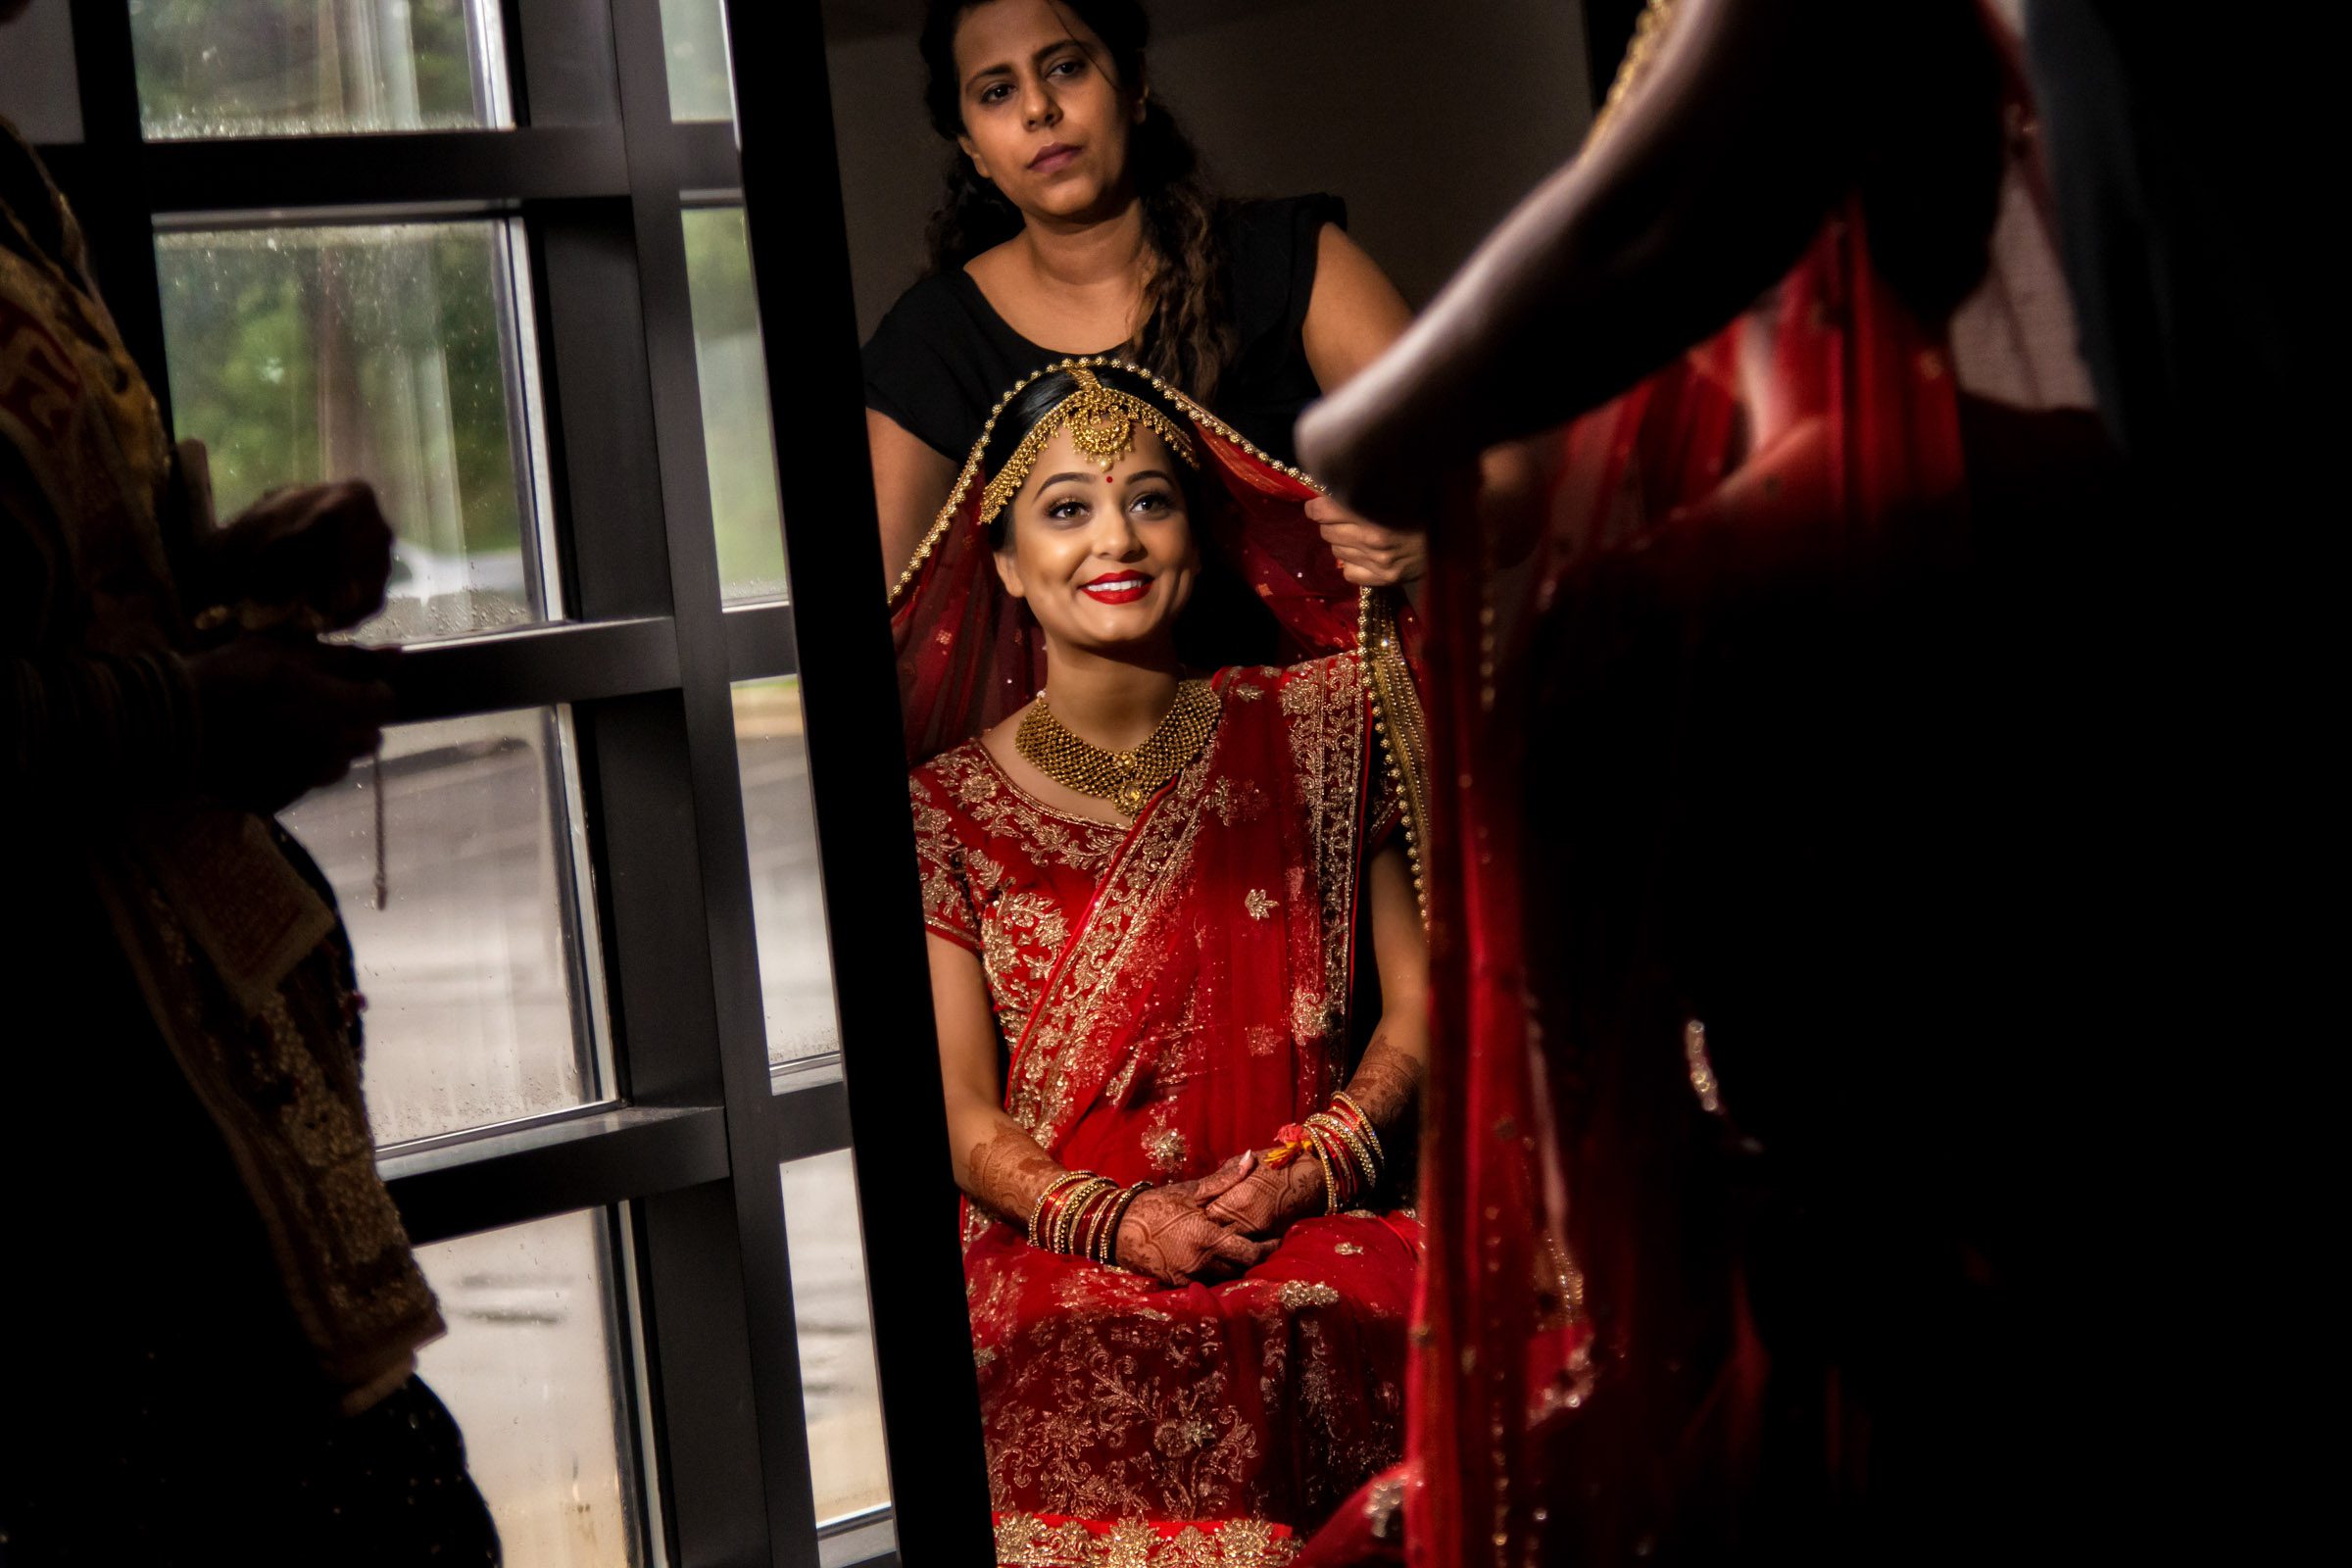 Wedding photographer in Atlanta capturing the bride getting ready for her big day in Greenville, South Carolina